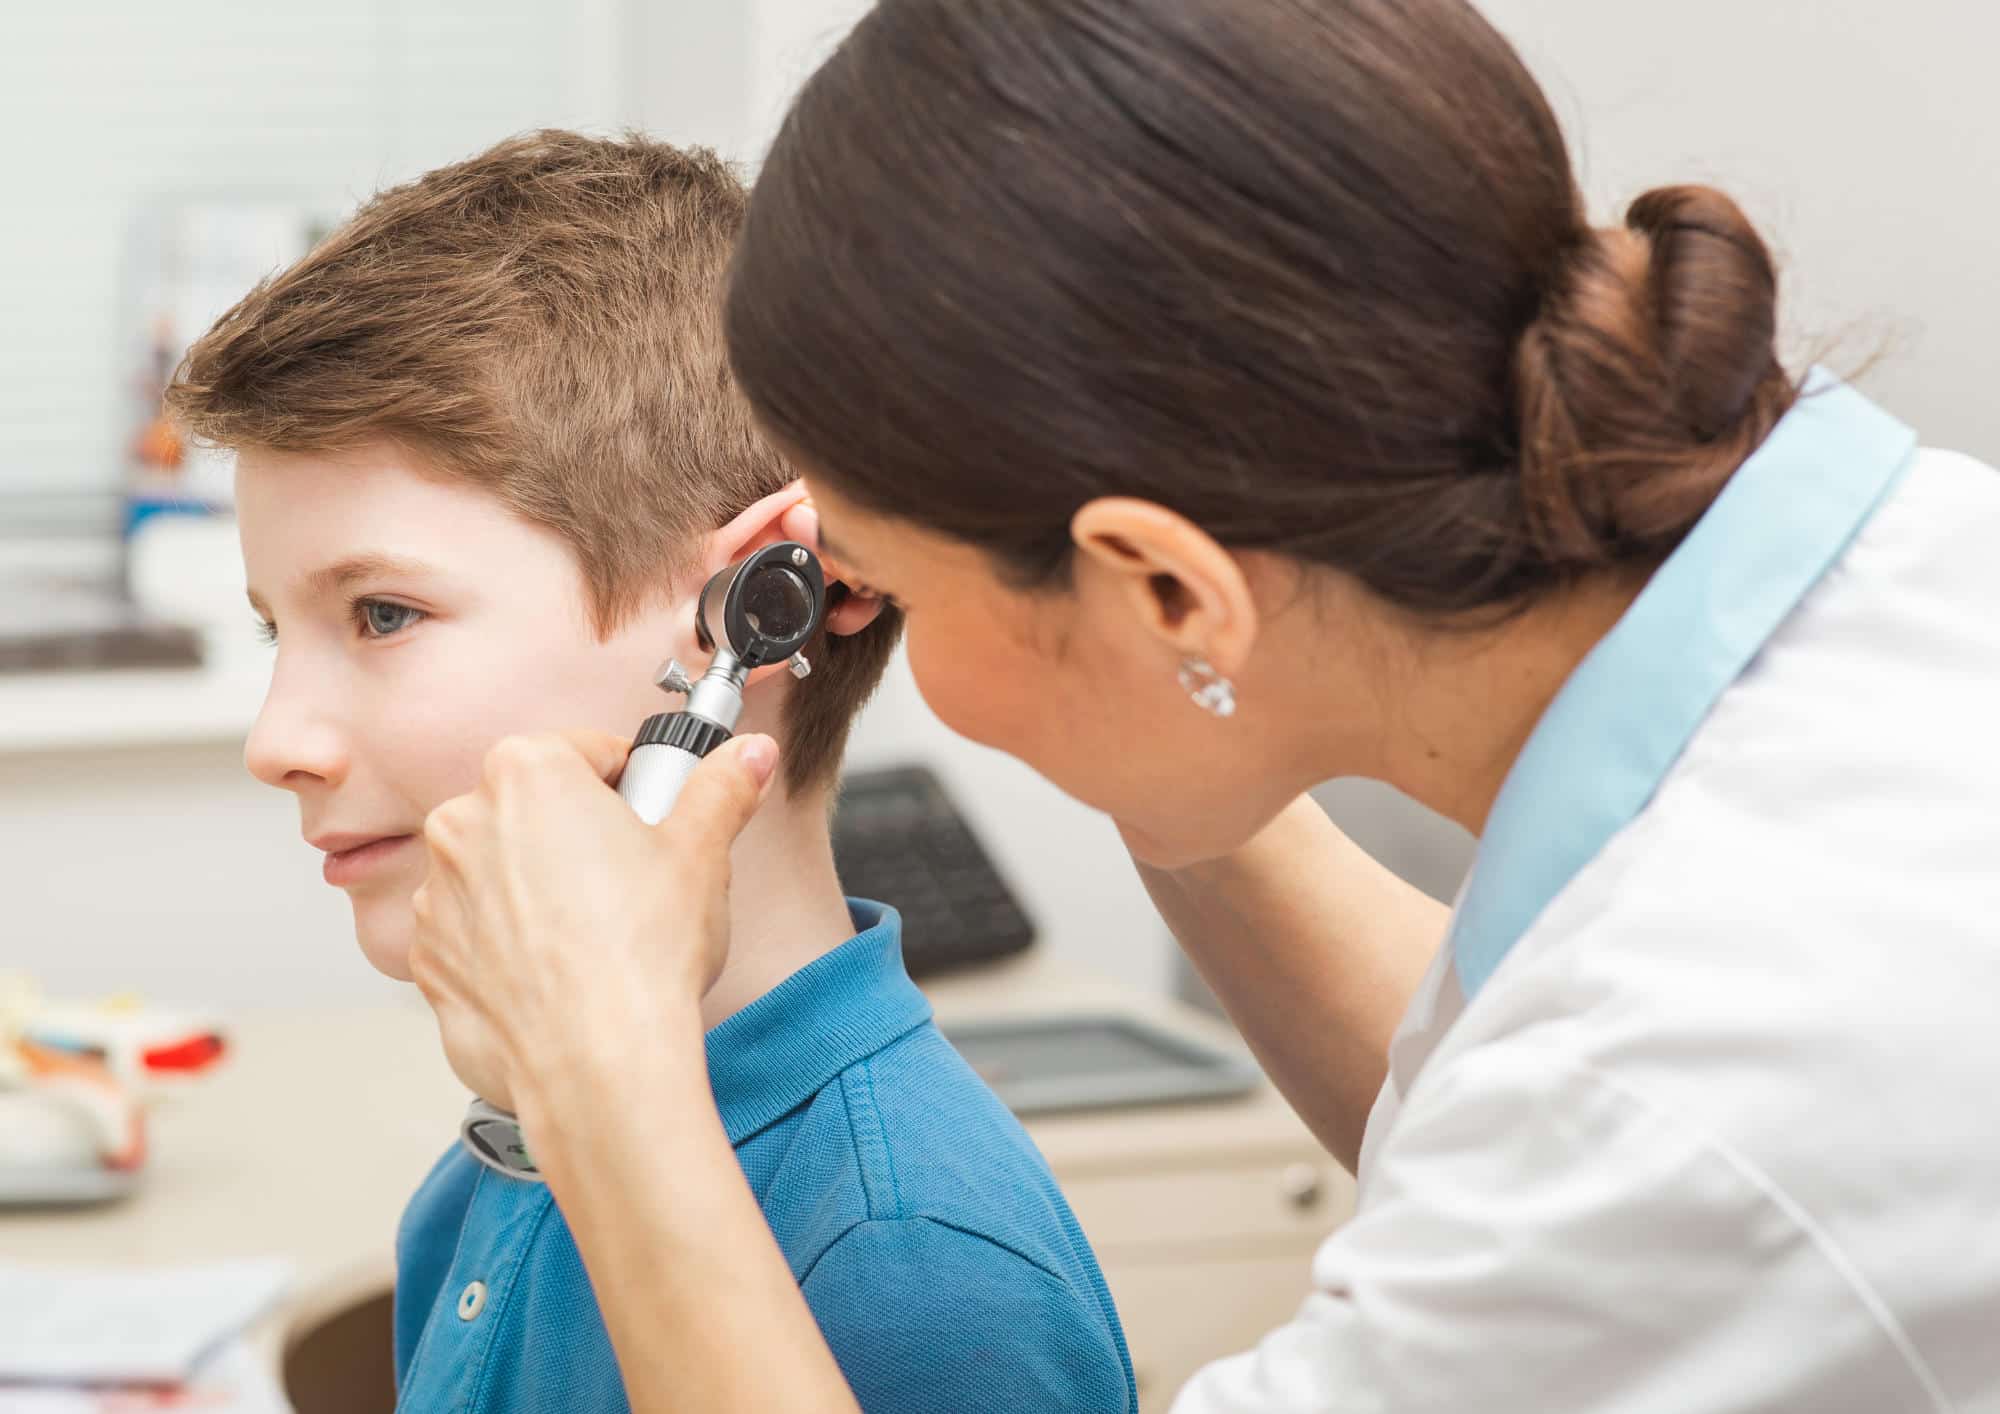 Audiologist with Otoscopy examining childs ear